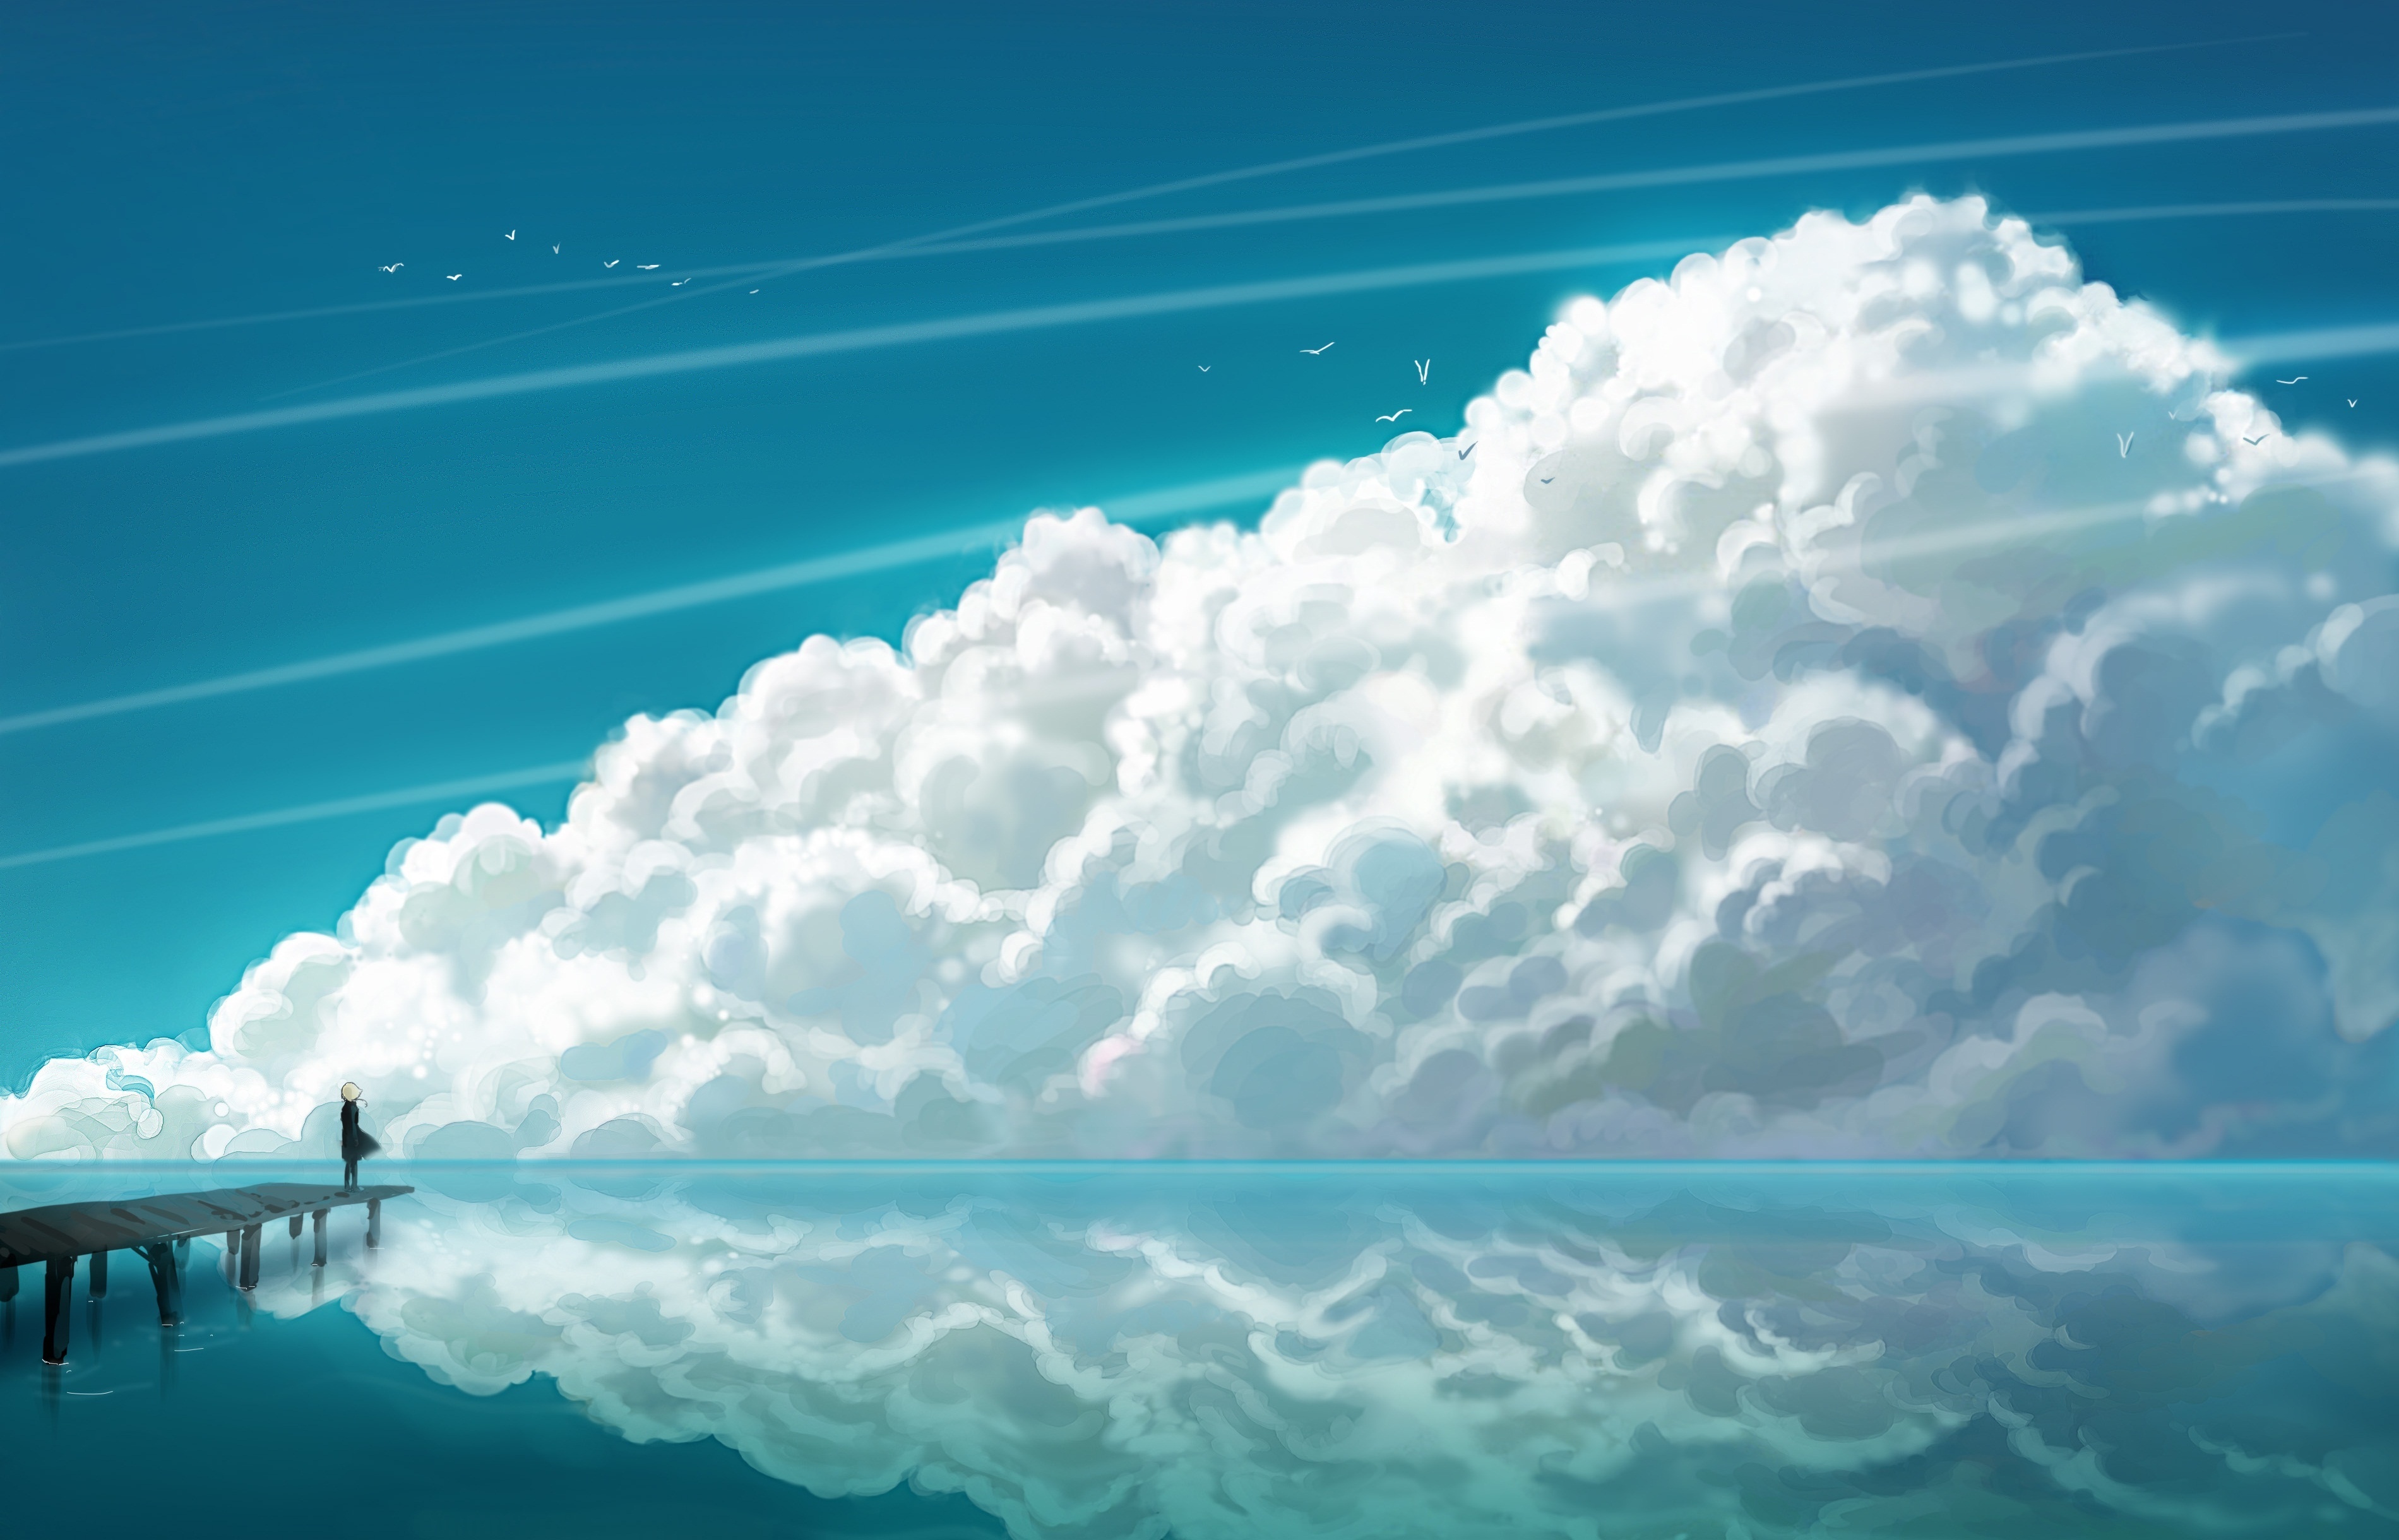 Desktop wallpaper with anime-style illustration of a pier reflecting on an ocean with clouds in the sky.